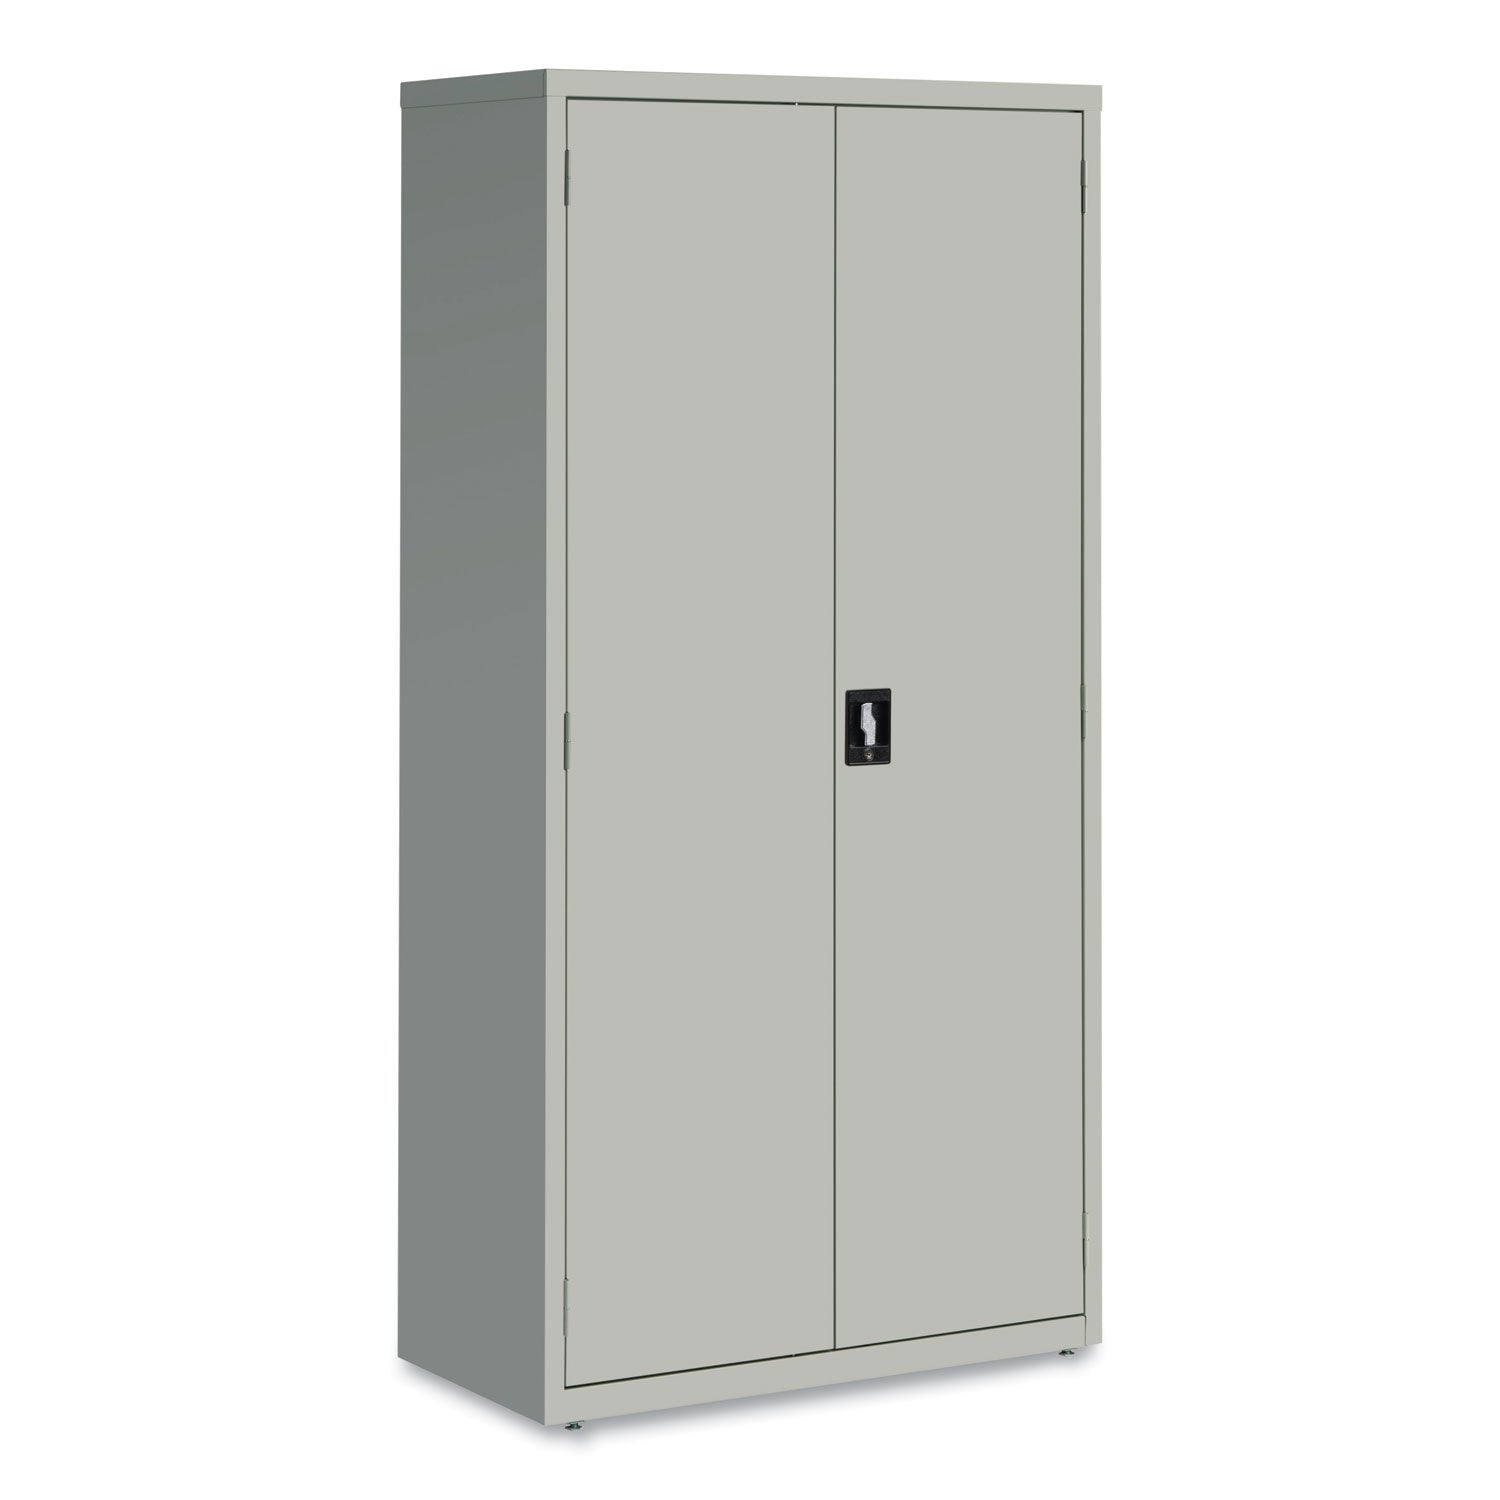 fully-assembled-storage-cabinets-5-shelves-36-x-18-x-72-light-gray_oifcm7218lg - 2